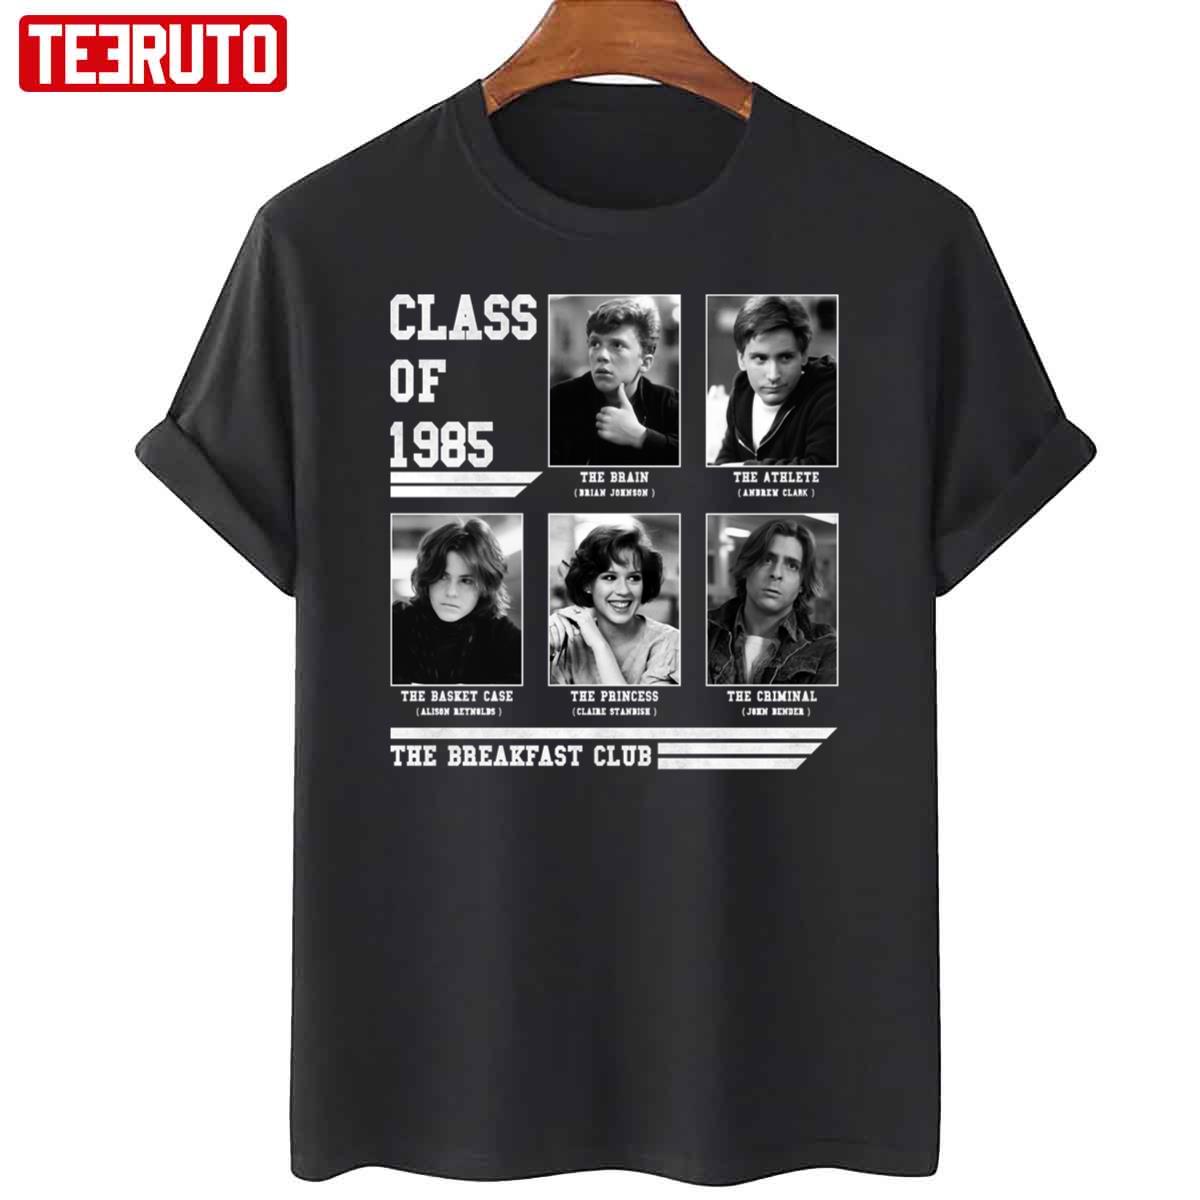 The Breakfast Club Class Of 1985 Photographic Unisex T-Shirt